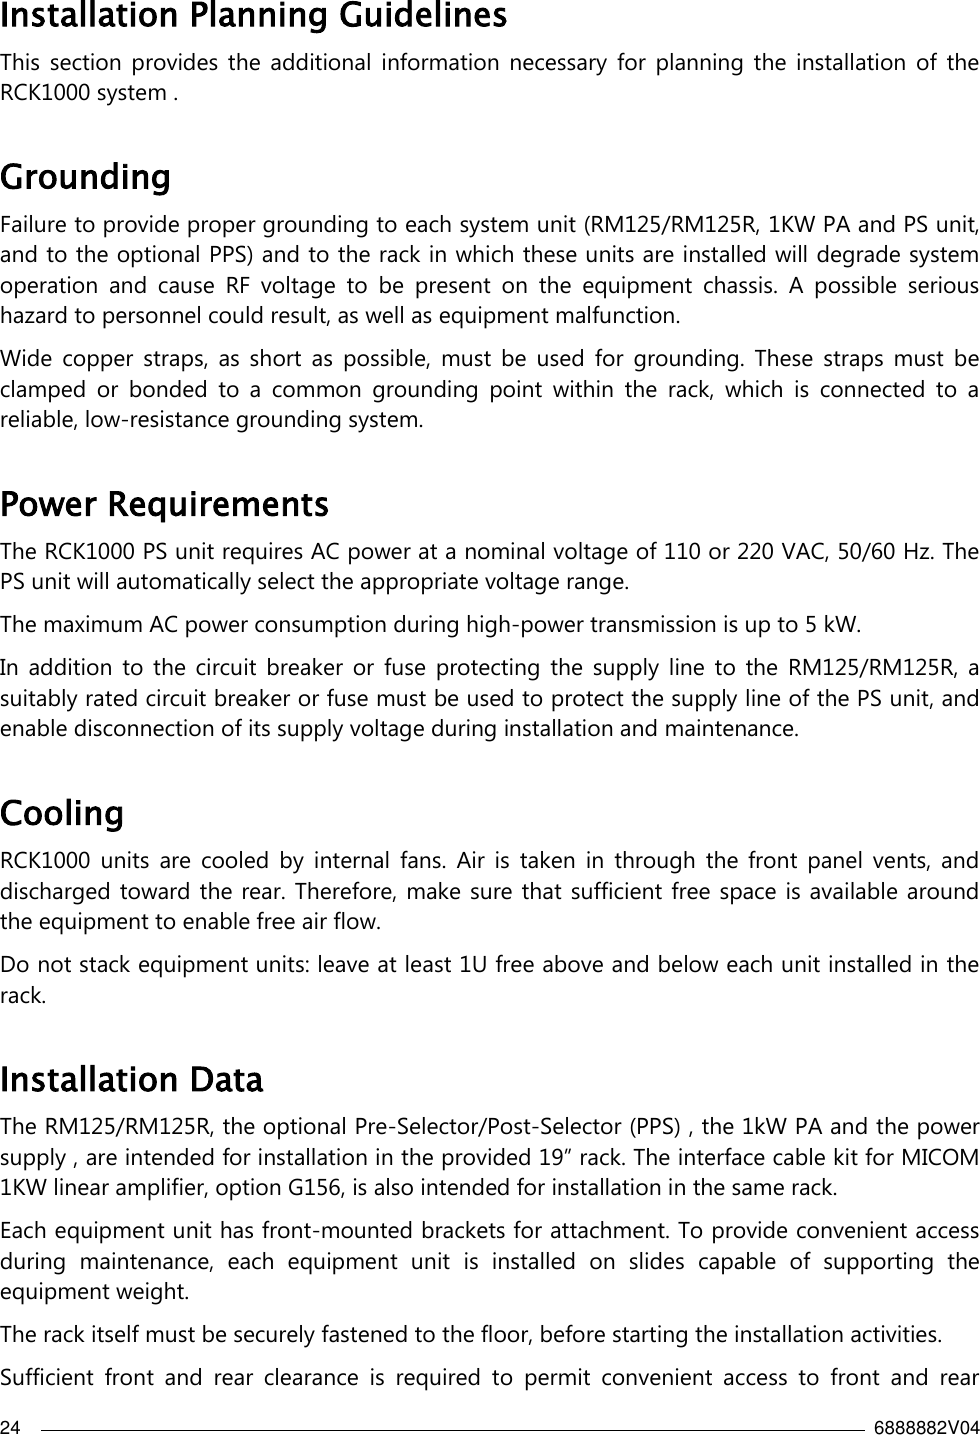 24    6888882V04  Installation Planning Guidelines  This  section  provides  the  additional  information  necessary  for  planning the  installation  of  the RCK1000 system . Grounding Failure to provide proper grounding to each system unit (RM125/RM125R, 1KW PA and PS unit, and to the optional PPS) and to the rack in which these units are installed will degrade system operation  and  cause  RF  voltage  to  be  present  on  the  equipment  chassis.  A  possible  serious hazard to personnel could result, as well as equipment malfunction.  Wide  copper  straps,  as  short  as  possible,  must  be  used  for  grounding.  These  straps  must  be clamped  or  bonded  to  a  common  grounding  point  within  the  rack,  which  is  connected  to  a reliable, low-resistance grounding system.   Power Requirements The RCK1000 PS unit requires AC power at a nominal voltage of 110 or 220 VAC, 50/60 Hz. The PS unit will automatically select the appropriate voltage range. The maximum AC power consumption during high-power transmission is up to 5 kW. In  addition  to  the  circuit  breaker  or  fuse  protecting the  supply  line  to  the  RM125/RM125R, a suitably rated circuit breaker or fuse must be used to protect the supply line of the PS unit, and enable disconnection of its supply voltage during installation and maintenance. Cooling RCK1000  units  are  cooled  by  internal  fans.  Air  is  taken  in  through  the  front  panel  vents,  and discharged toward the rear. Therefore, make sure that sufficient free space is available around the equipment to enable free air flow. Do not stack equipment units: leave at least 1U free above and below each unit installed in the rack. Installation Data The RM125/RM125R, the optional Pre-Selector/Post-Selector (PPS) , the 1kW PA and the power supply , are intended for installation in the provided 19” rack. The interface cable kit for MICOM 1KW linear amplifier, option G156, is also intended for installation in the same rack. Each equipment unit has front-mounted brackets for attachment. To provide convenient access during  maintenance,  each  equipment  unit  is  installed  on  slides  capable  of  supporting  the equipment weight. The rack itself must be securely fastened to the floor, before starting the installation activities. Sufficient  front  and  rear  clearance  is  required  to  permit  convenient  access  to  front  and  rear 